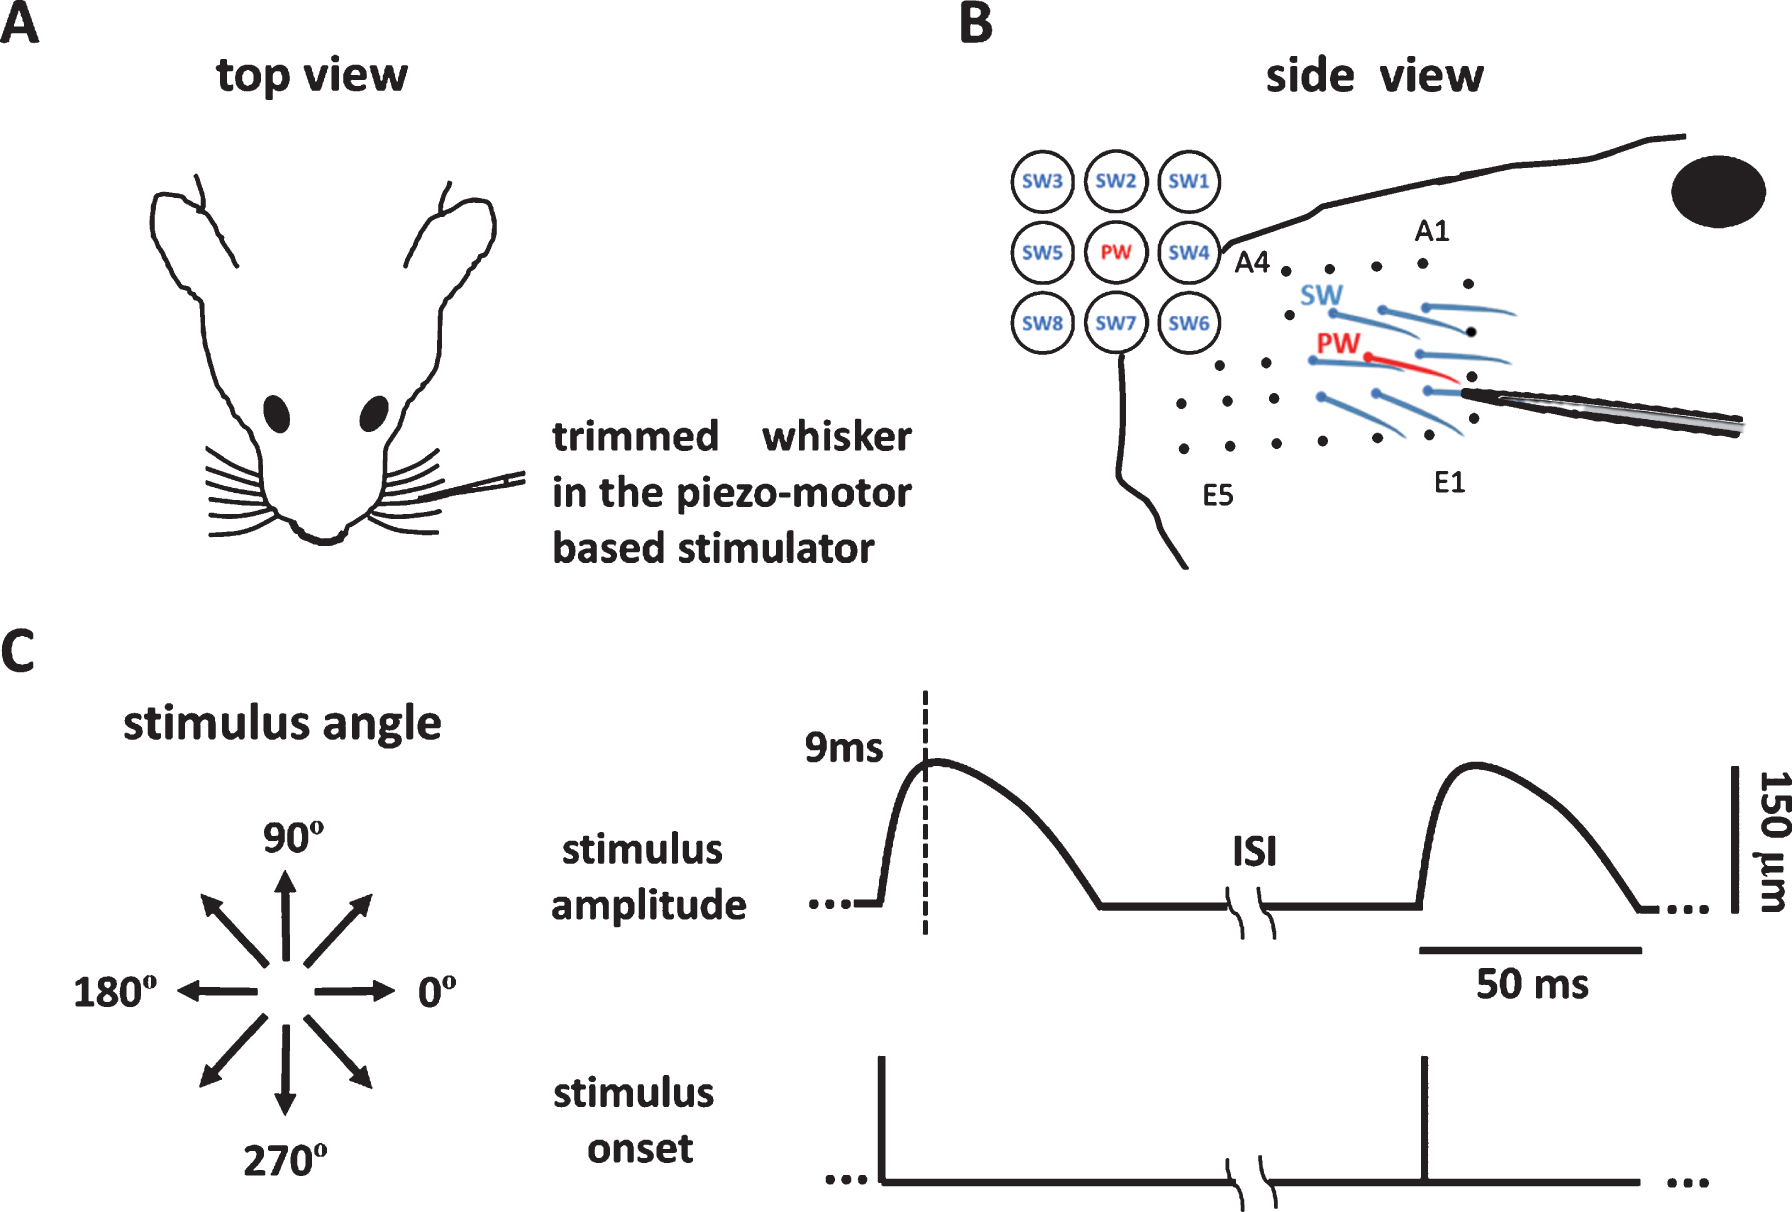 Whisker stimulations presented by the whisker stimulator. (A) The setup for recording and whisker stimulation. The animal’s whiskers were trimmed, a whisker was mounted into the piezo-motor based stimulator, and neuronal signals were obtained by the micro-wire electrode. (B) The principle whisker (PW) (red) and eight surrounding whiskers (SWs) (blue) were first identified by manual mapping, and each of the whiskers was stimulated one-by-one in the stimulator. (C) The left panel shows the eight stimulus directions. The 0° and 180° indicate the posterior and anterior directions with respect to the left mystacial pad. The right panel shows the bending amplitude as a function of time. The bending peaked 9 ms post stimulus onset and gradually return to the baseline position 50 ms after stimulus onset.